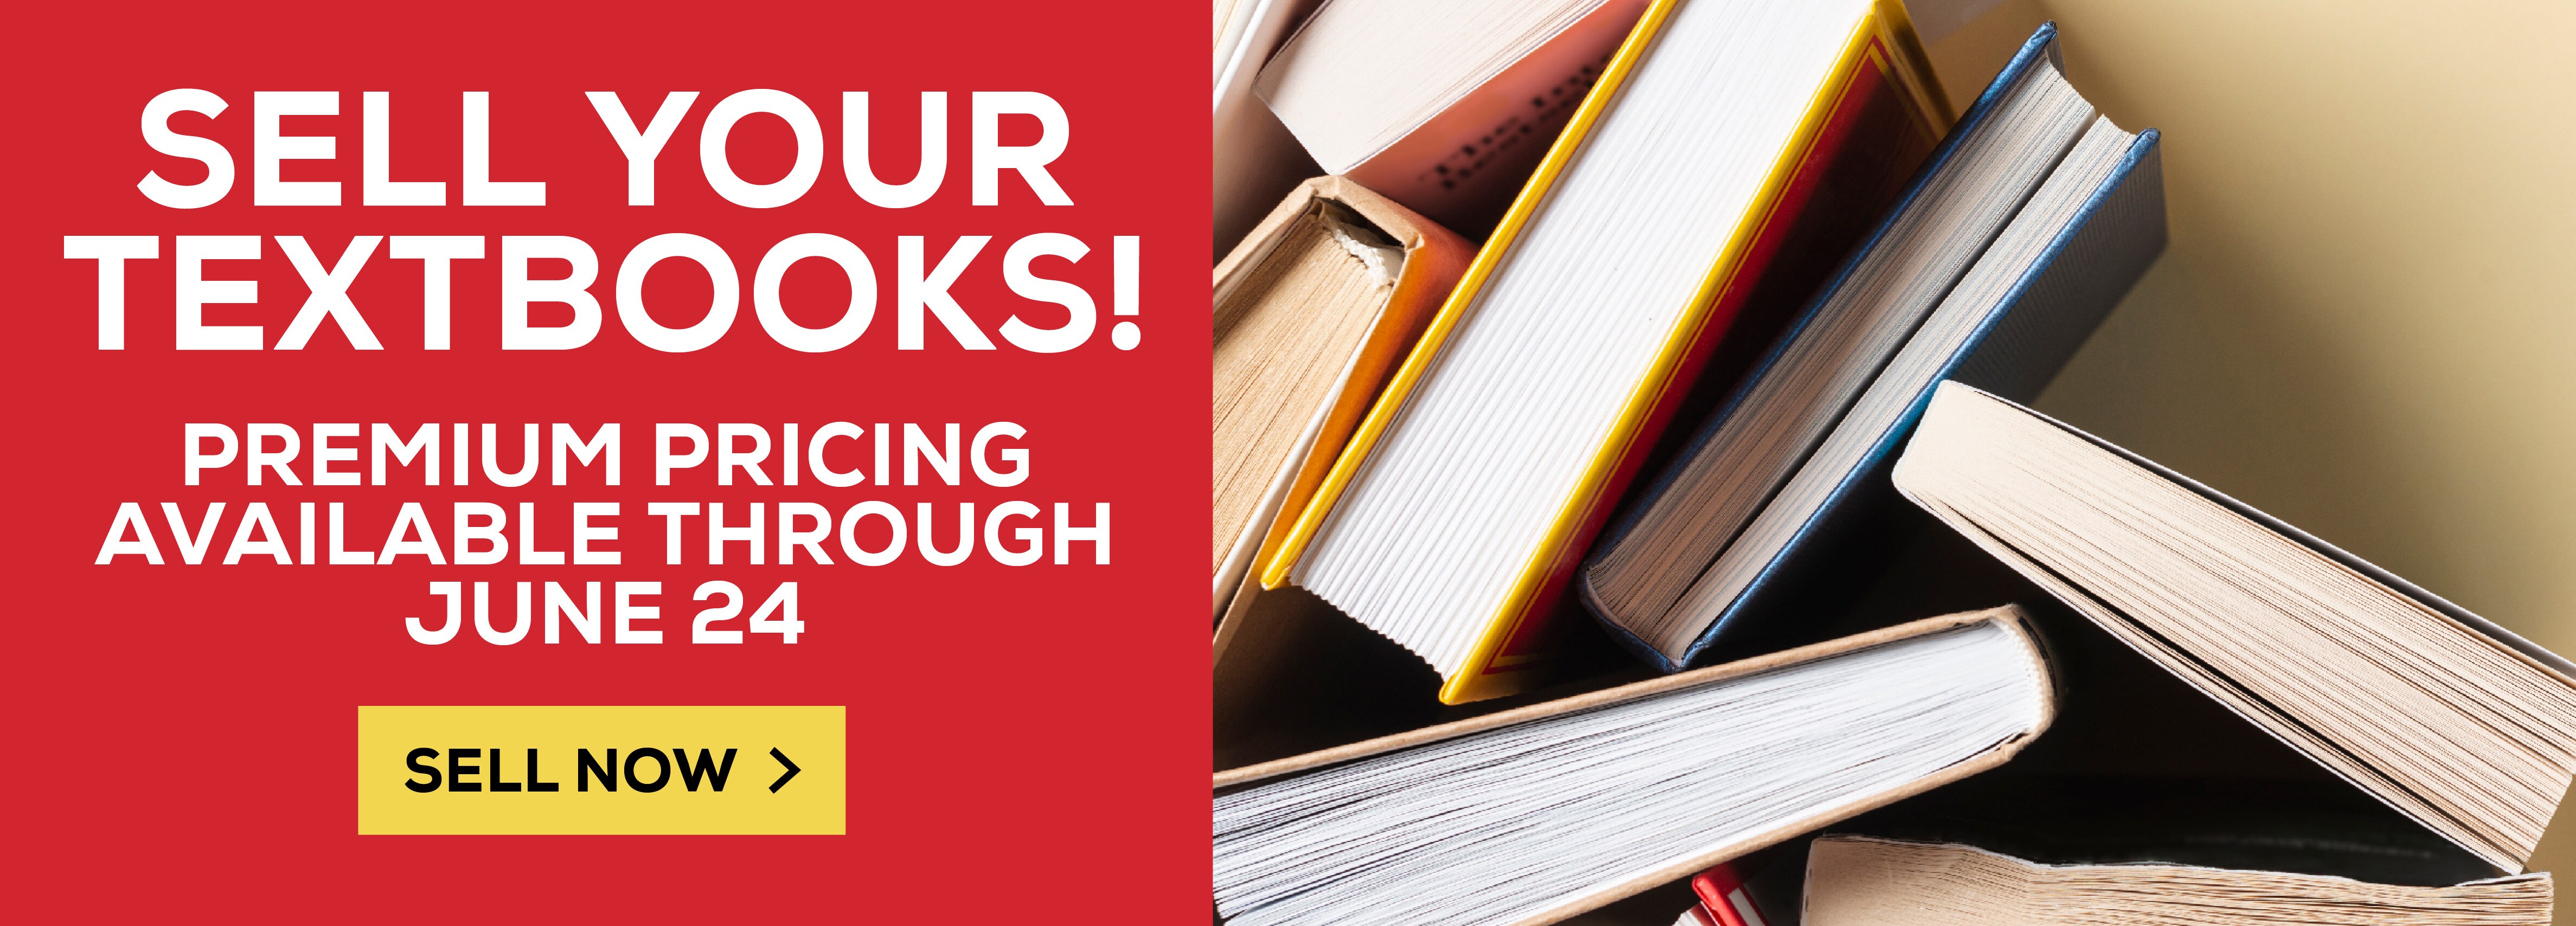 Sell Your Textbooks! Premium pricing available through June 24. Sell Now!					